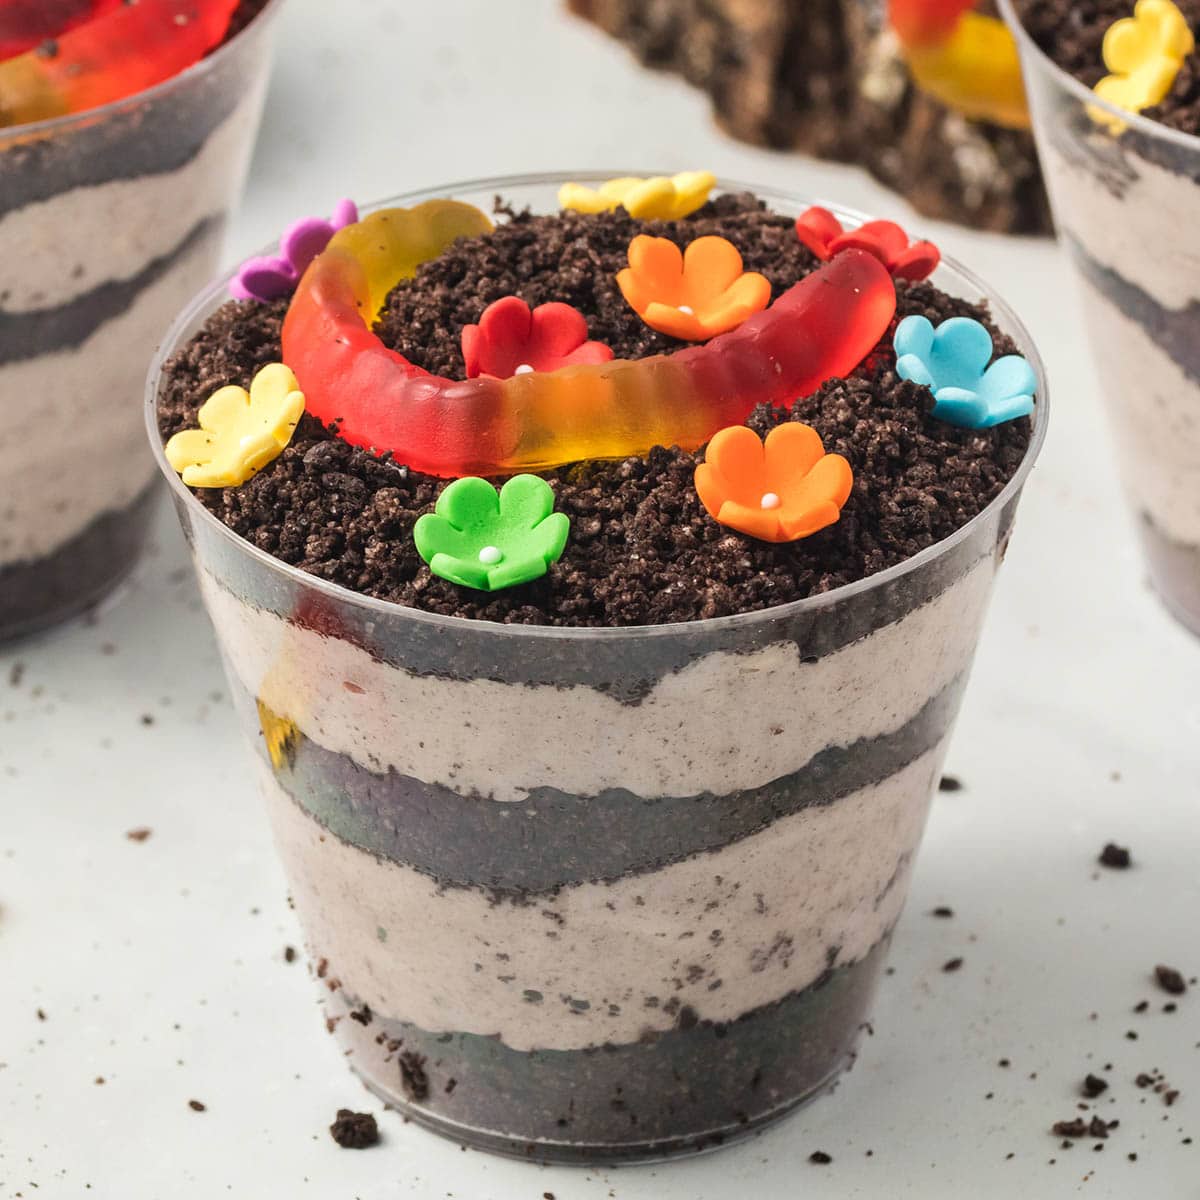 Homemade Oreo Desserts: Gummy Worms & Dirt Cake in Edible Bowls